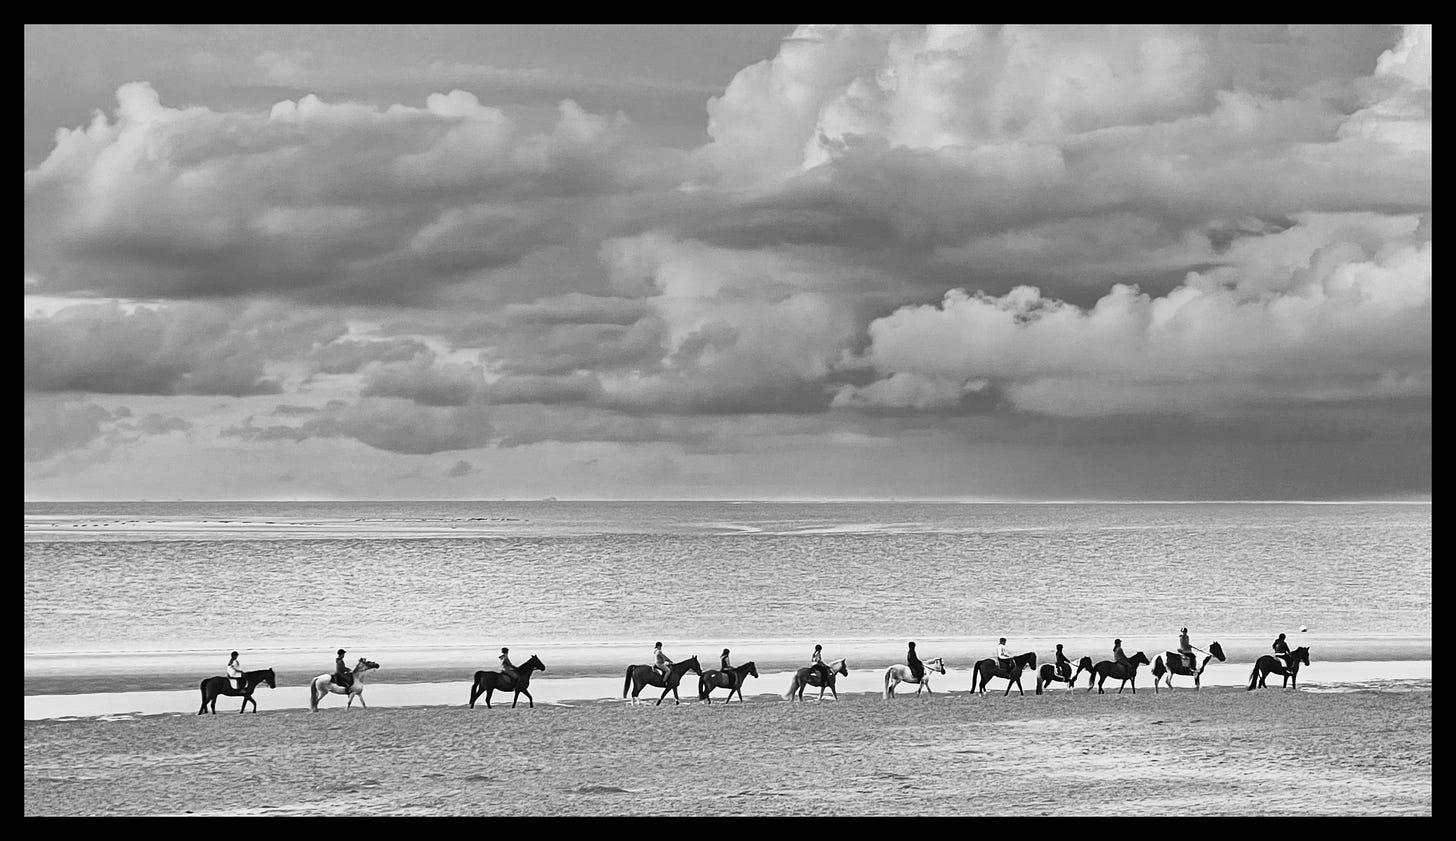 Horses on the beach on the west coast of Schouwen-Duiveland for #WorldPhotogrpahyDay by Alexander Verbeek